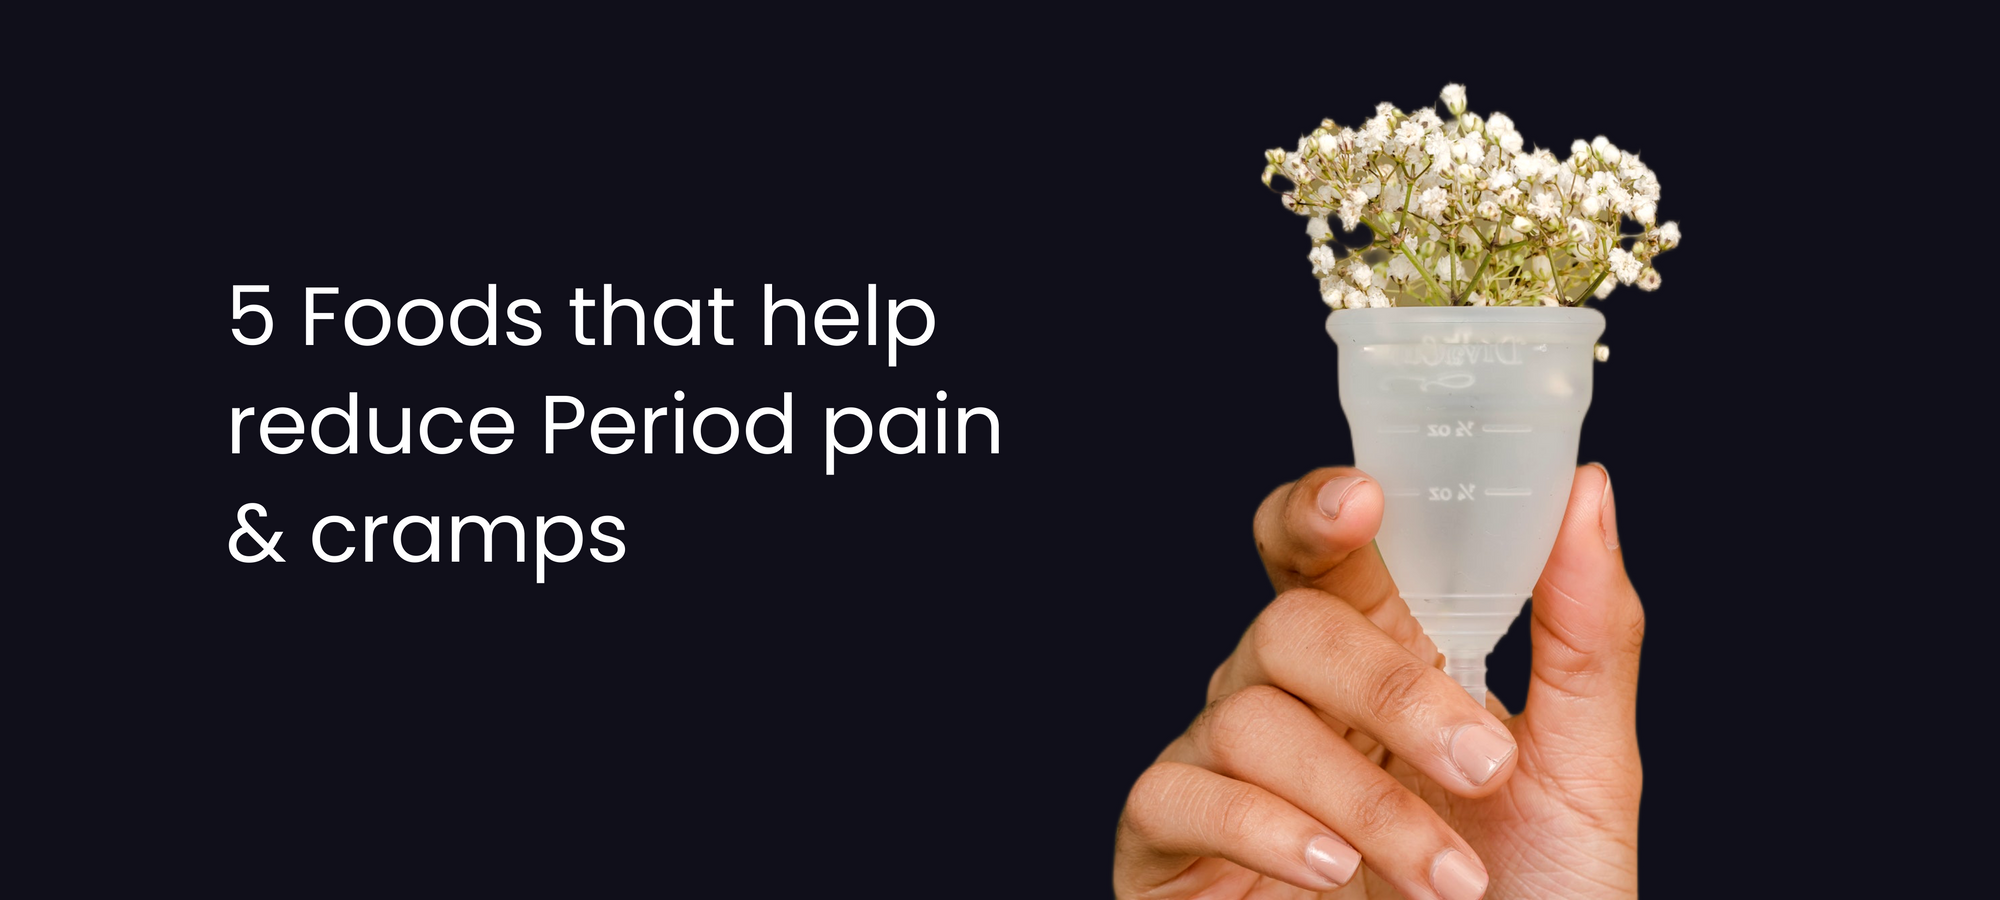 5 Foods that help reduce Period pain and cramps